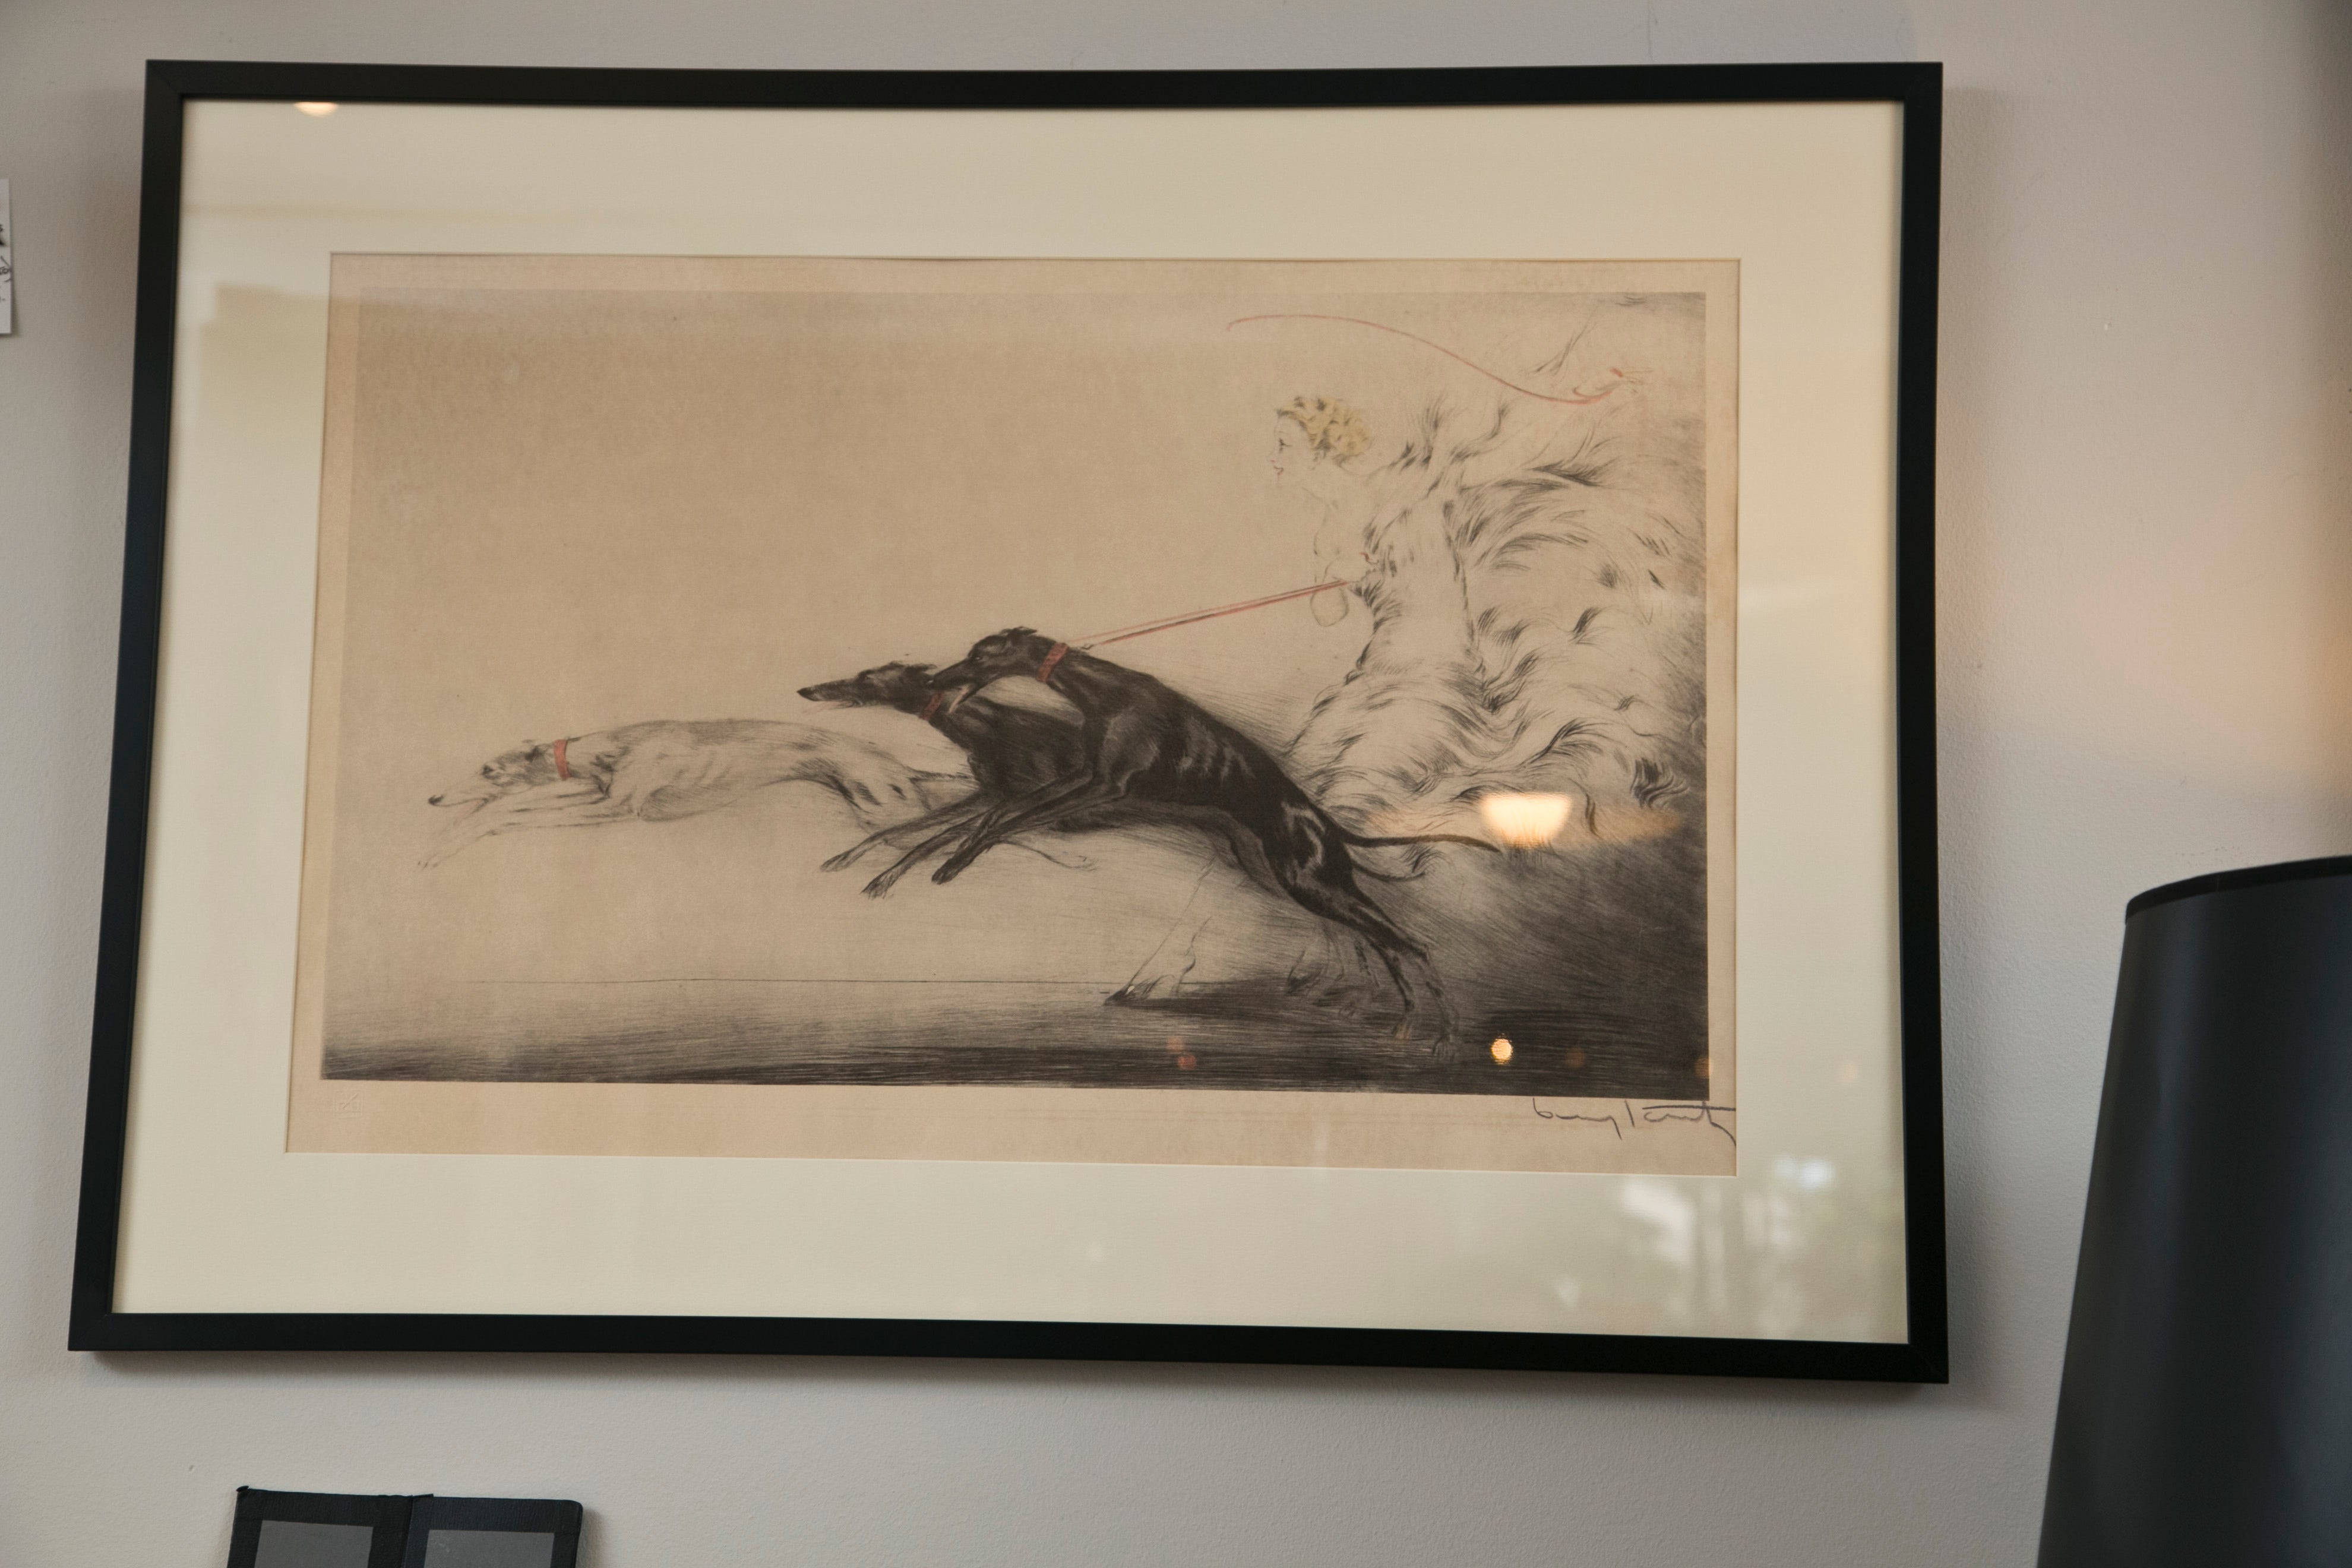 Lithograph "Speed" Signed Louis Icart